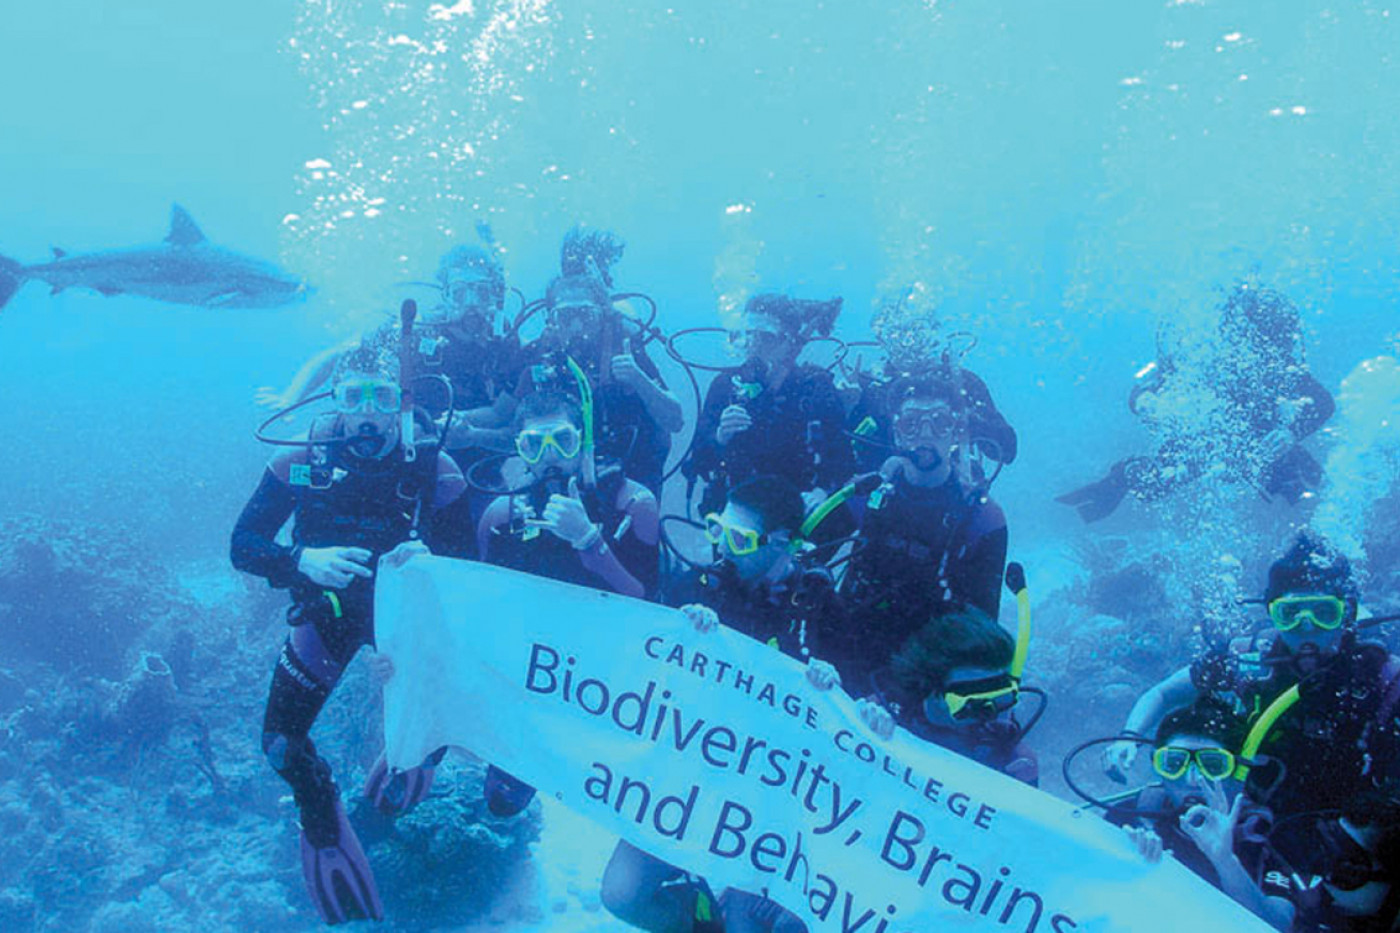 Students on the J-Term study tour Biodiversity, Brains and Behavior encounter a shark underwater ...